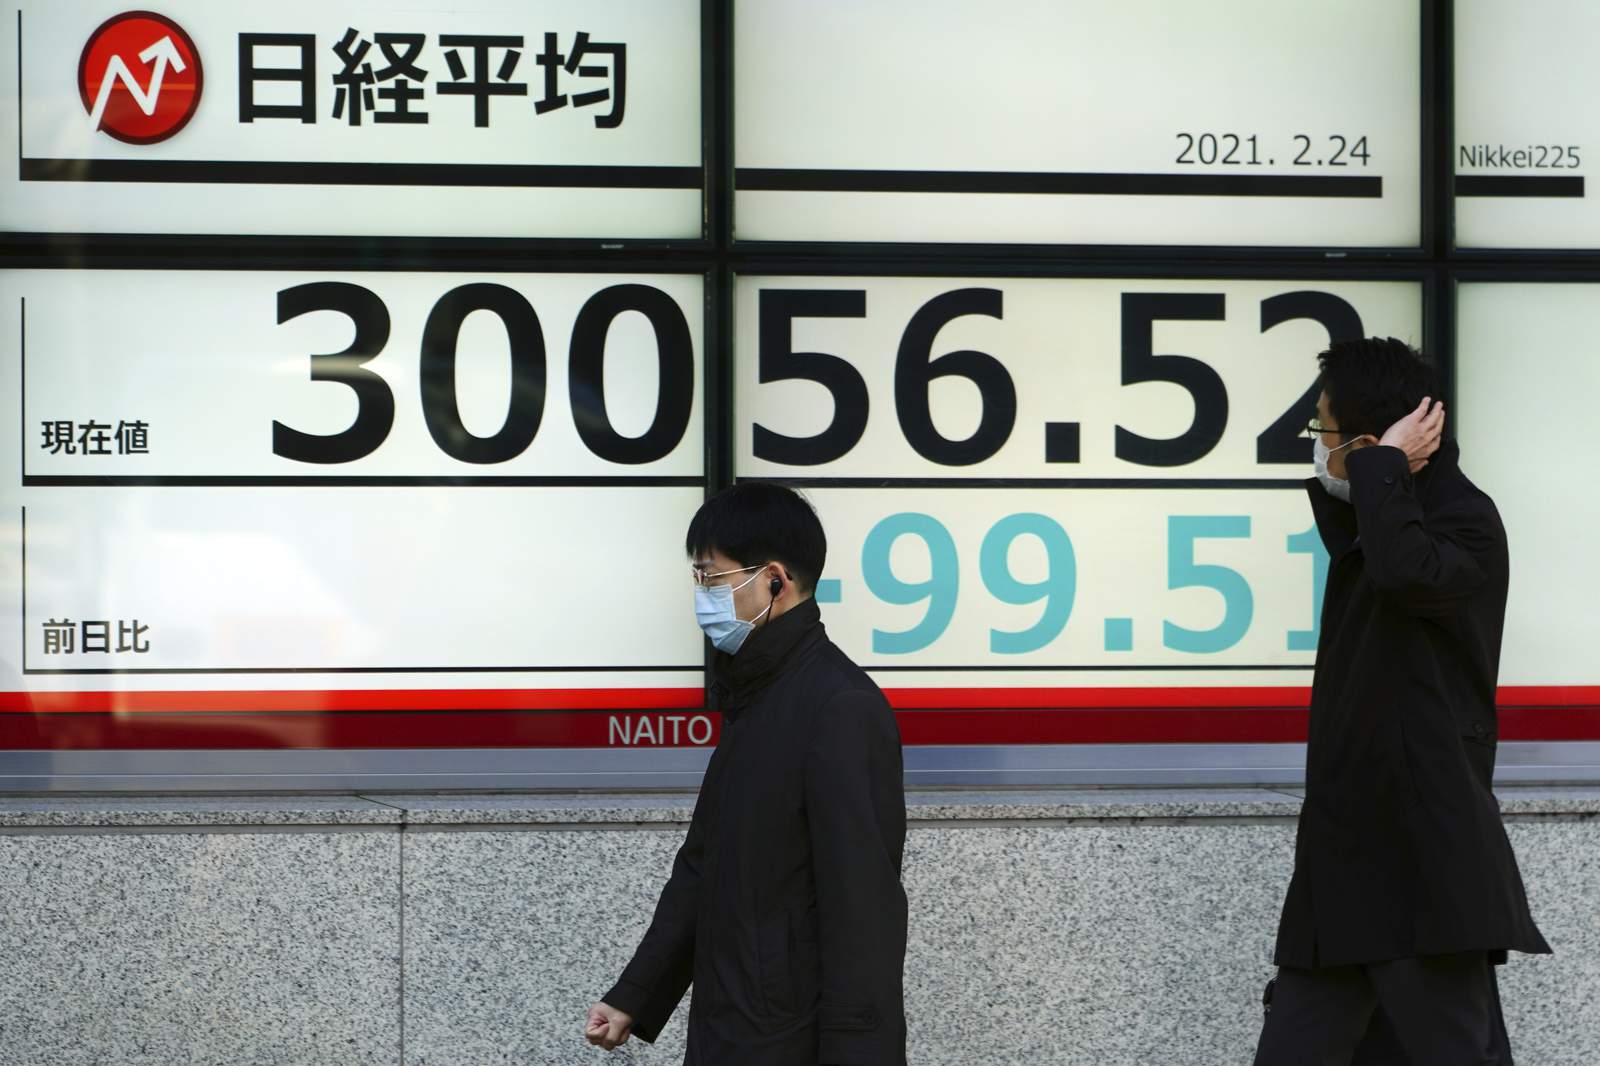 Asian shares slip on jitters over inflation, interest rates